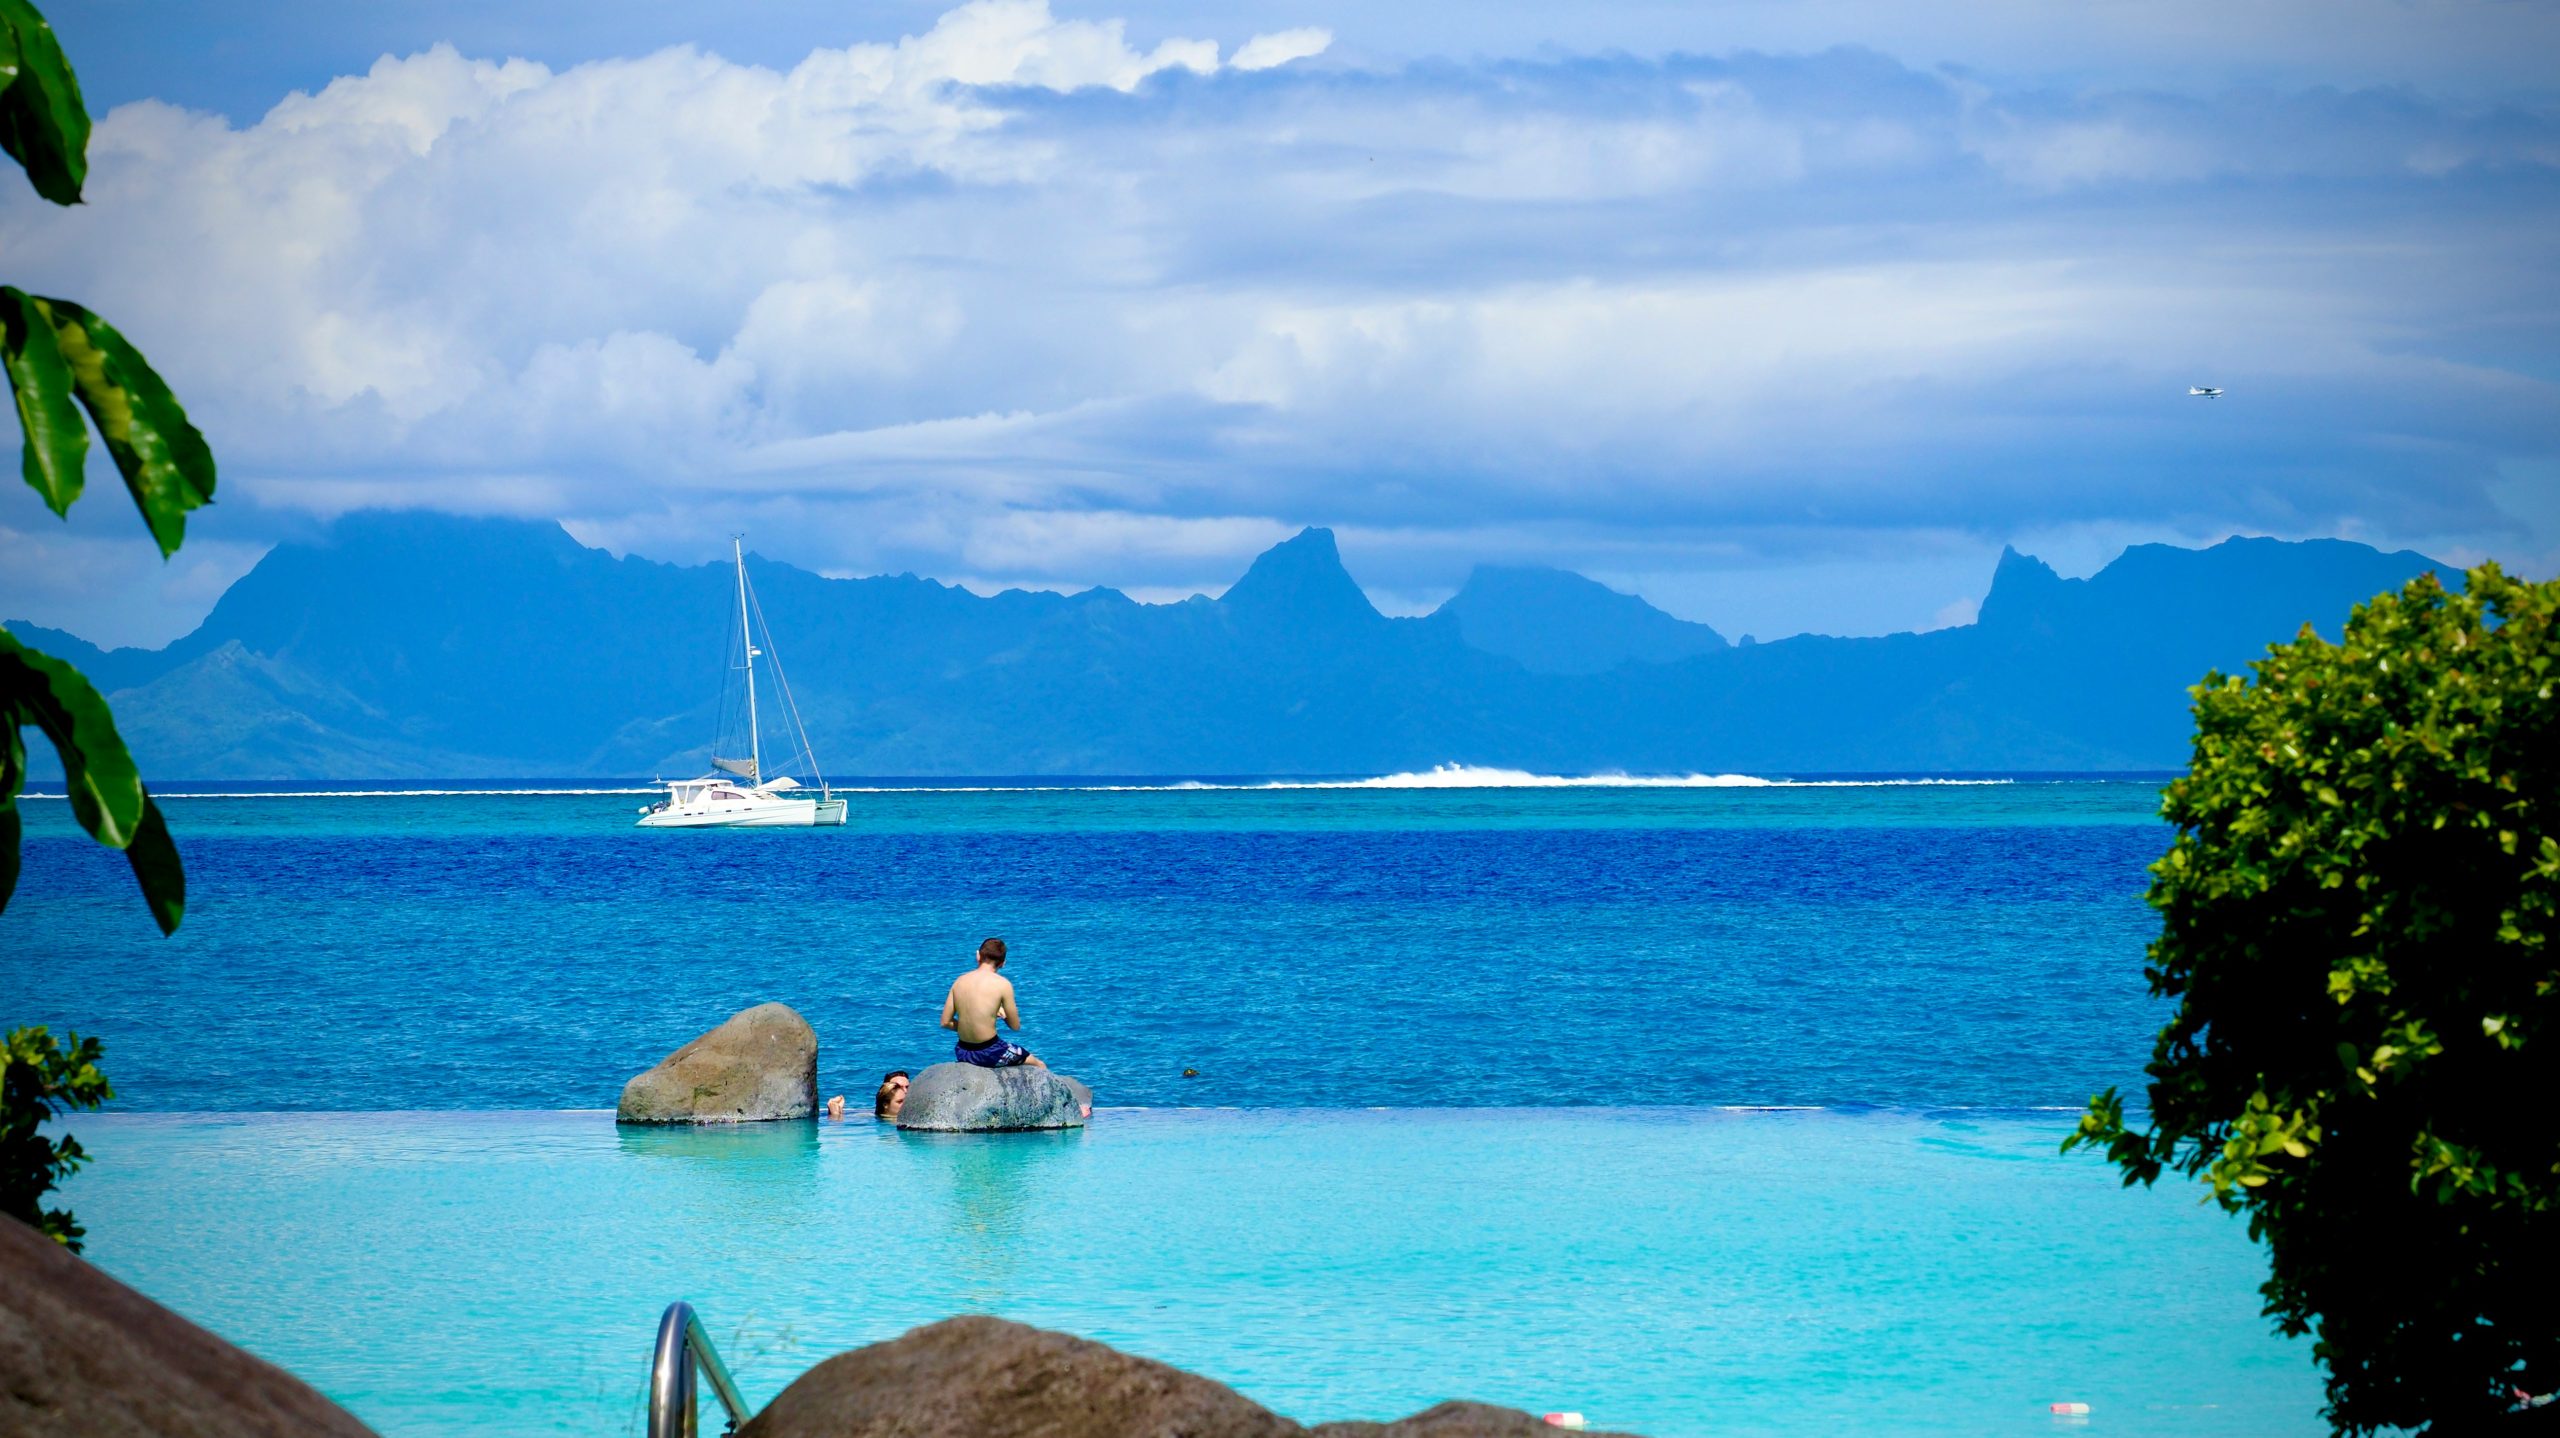 discover the beauty of tahiti with our unforgettable tahiti cruise experience. explore crystal-clear waters, pristine beaches, and the rich cultural heritage of the polynesian islands.